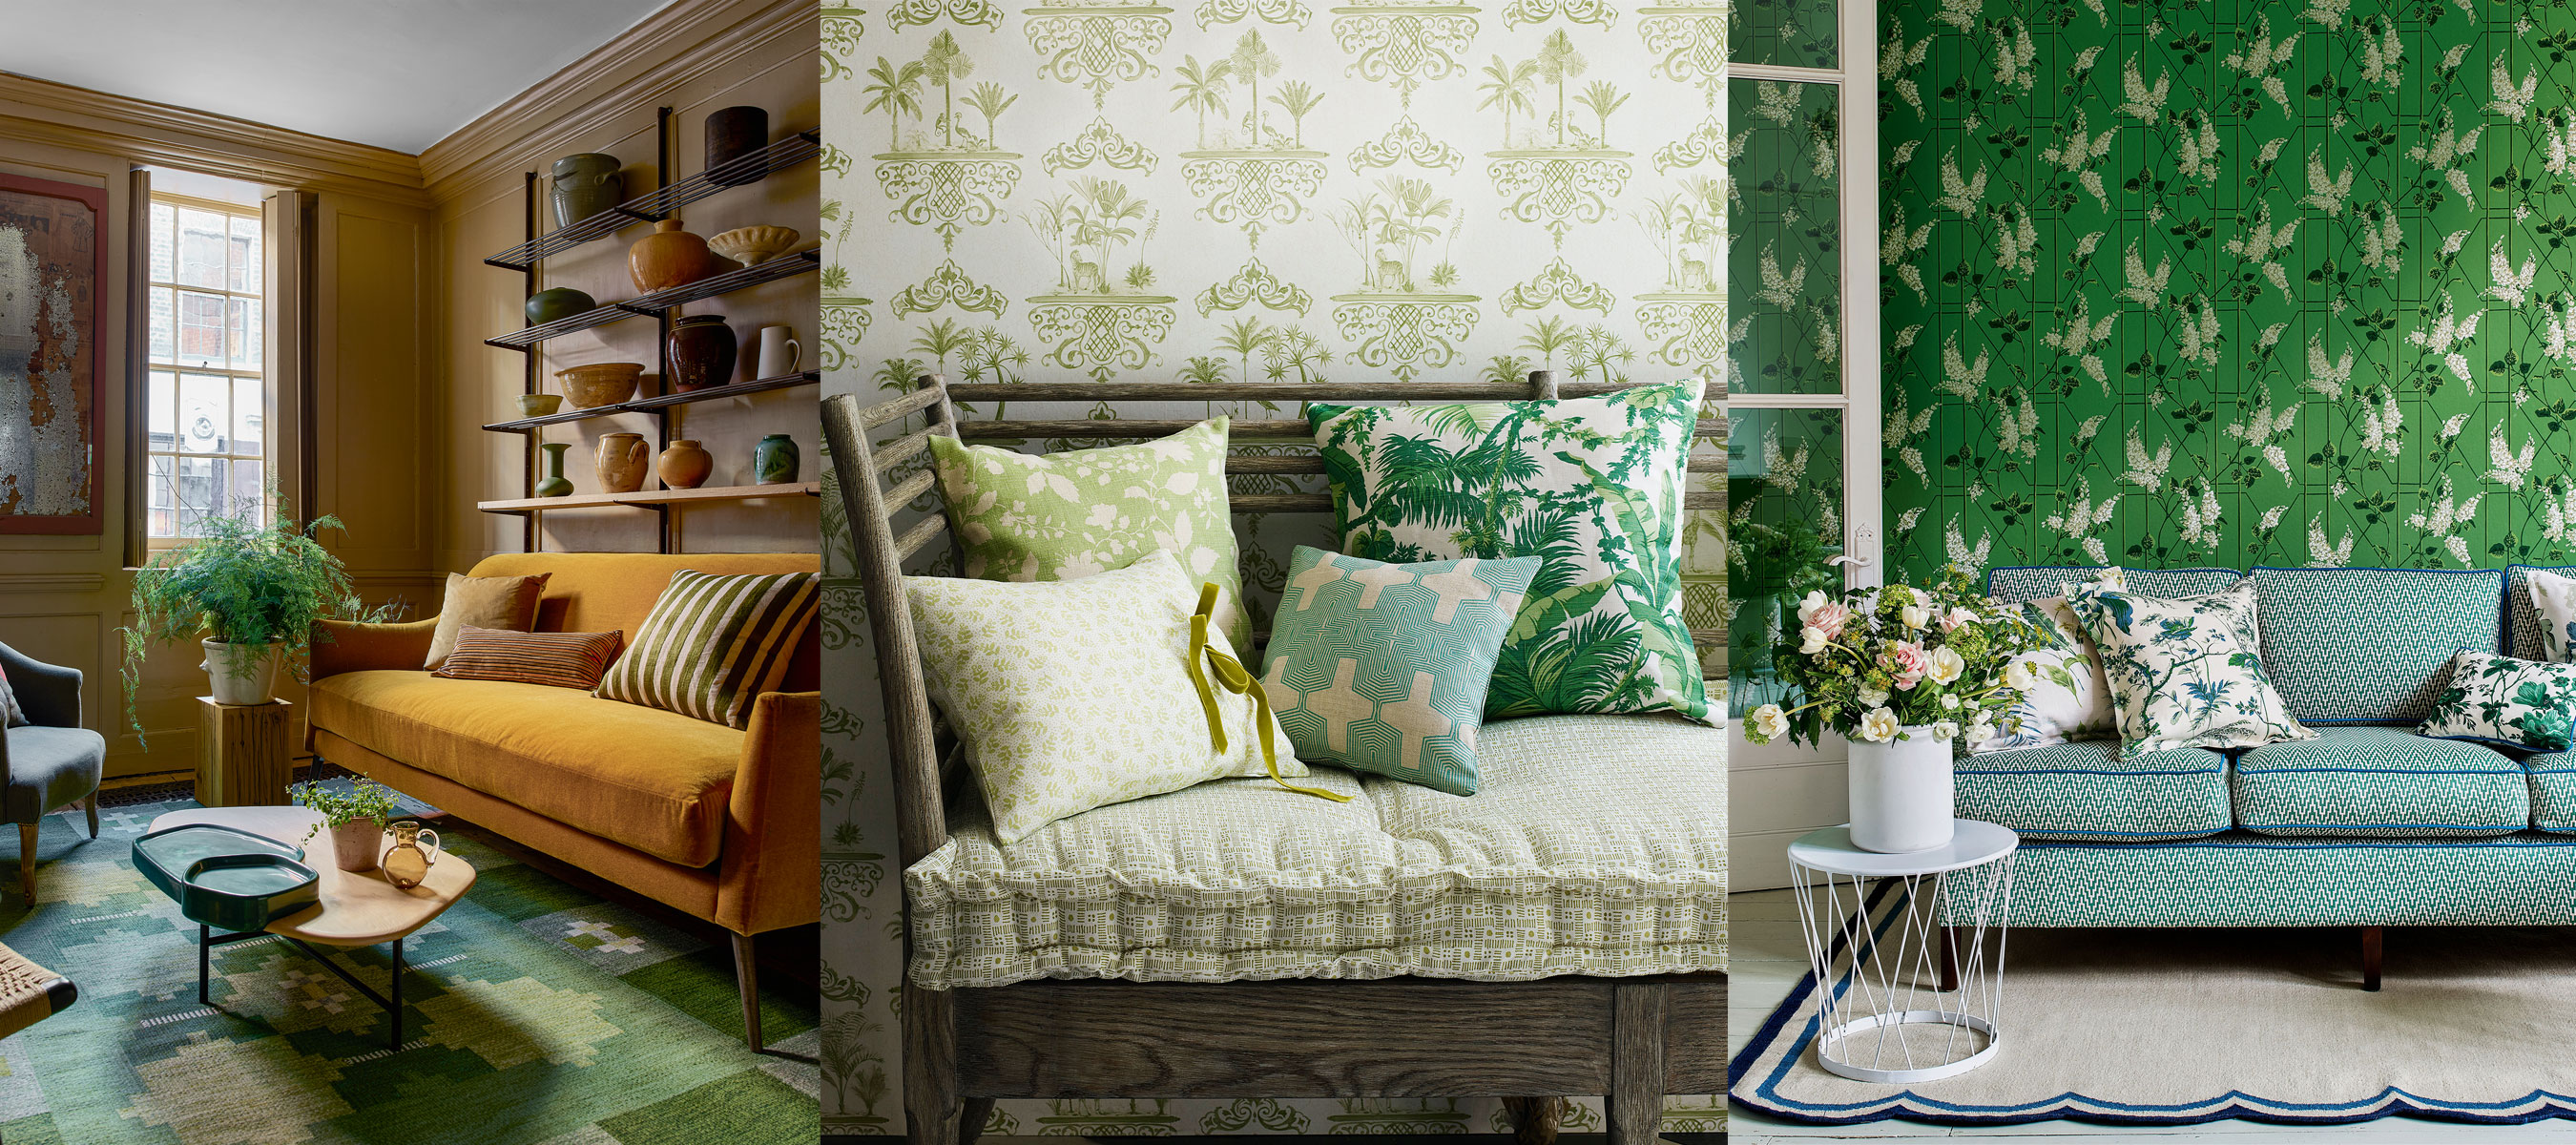 Yellow and green room ideas – 10 ways to decorate with natural tones